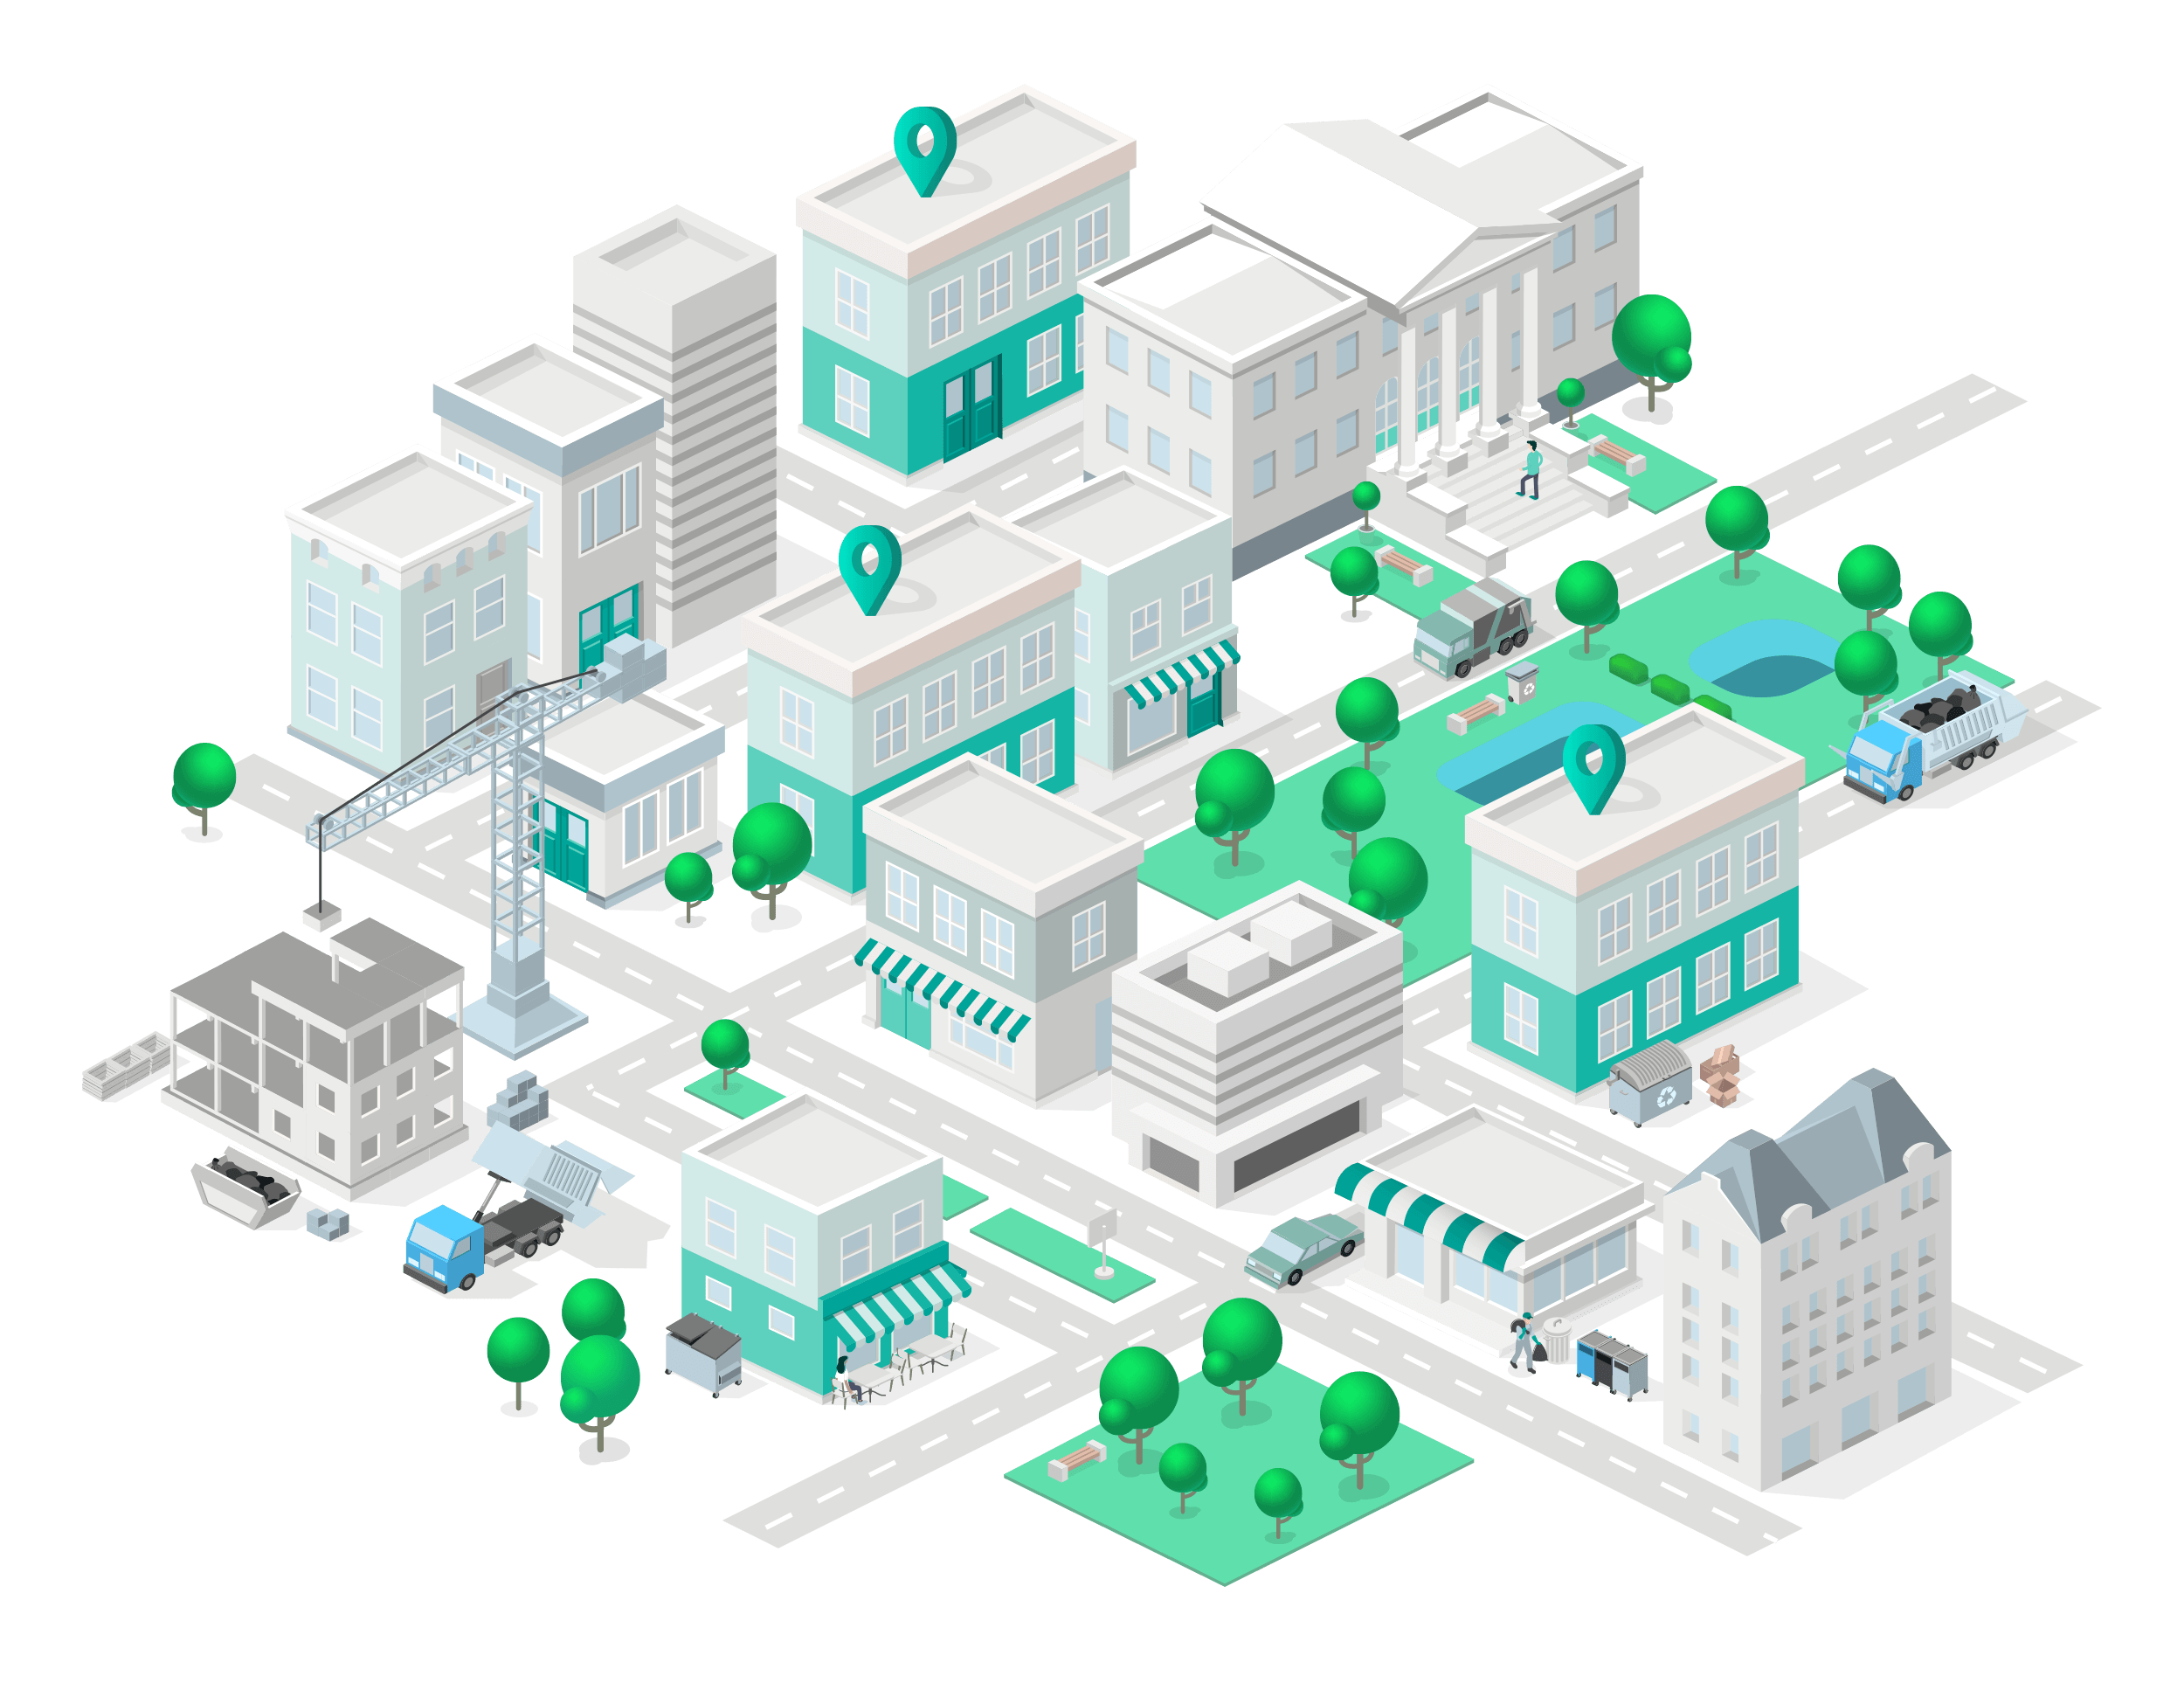 Rubicon smart city isometric illustration featuring buildings